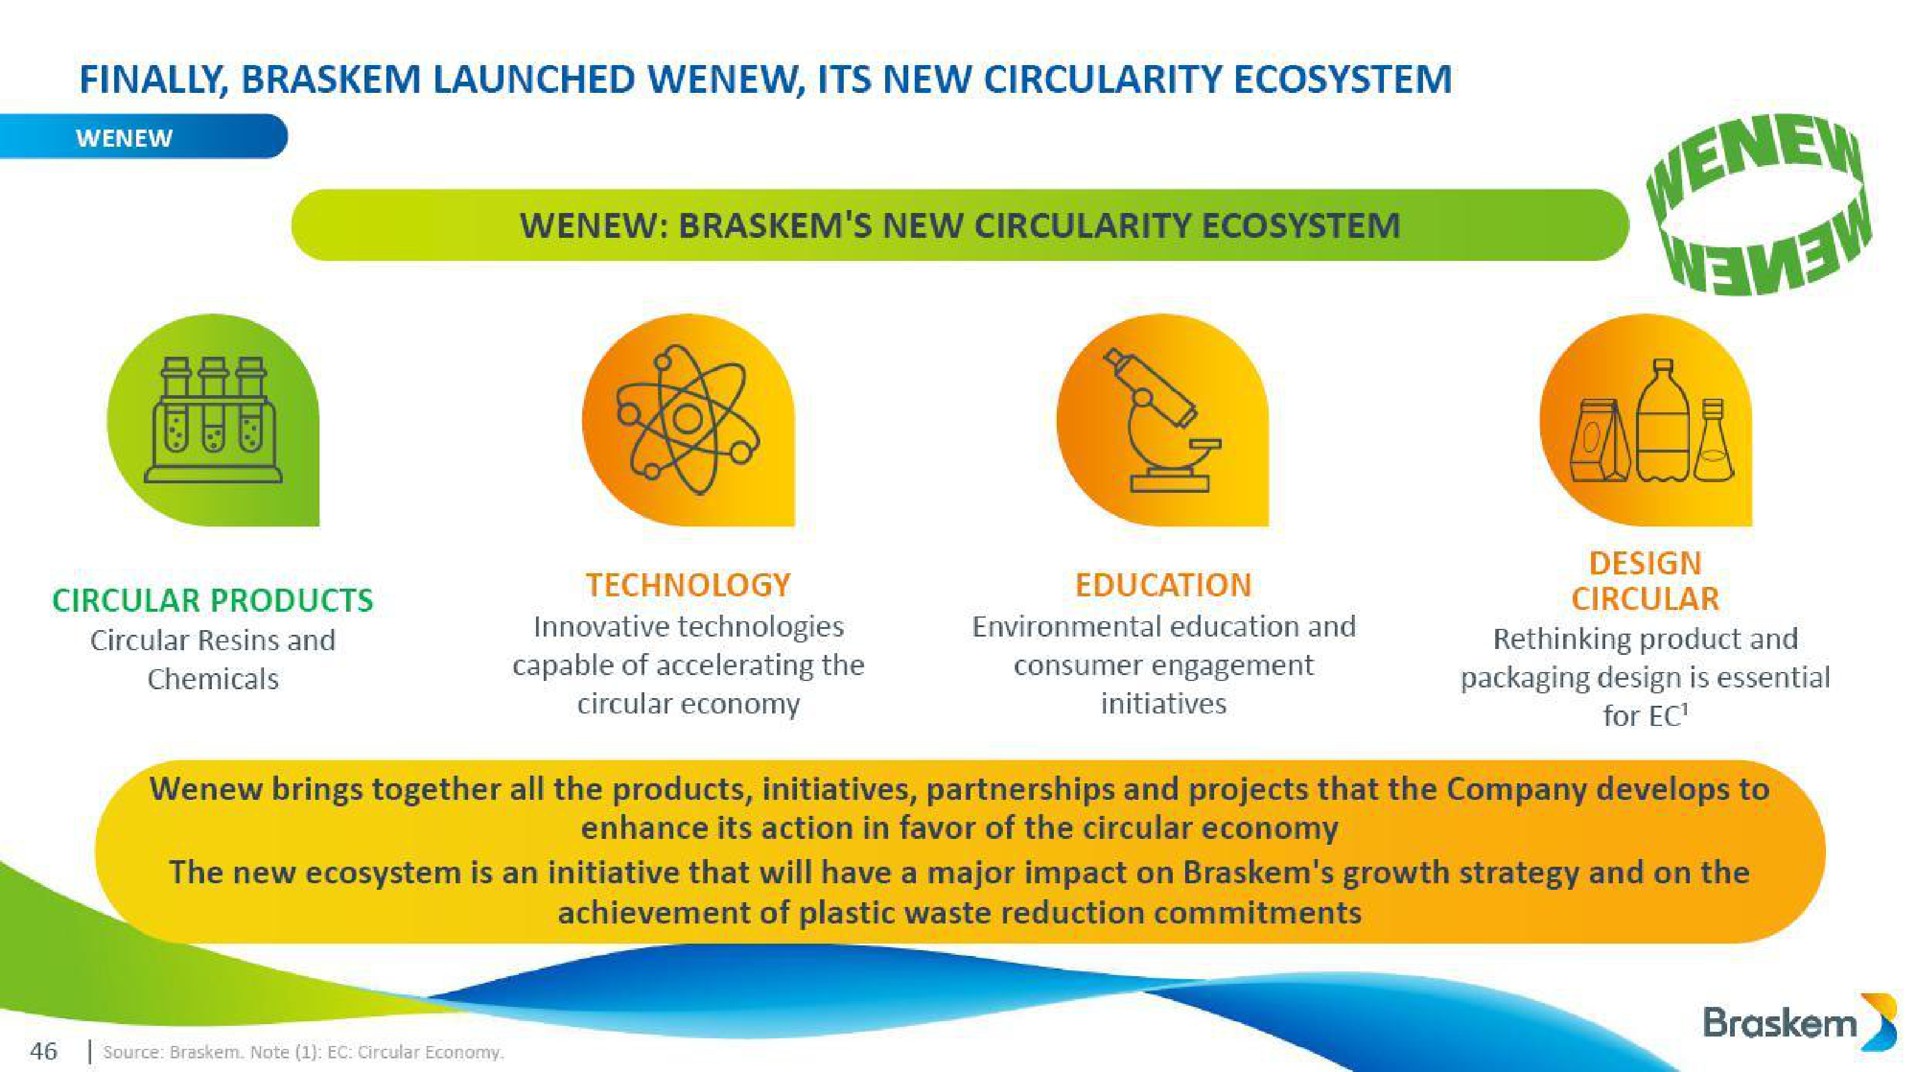 finally launched its new circularity ecosystem via circular products technology education circular | Braskem